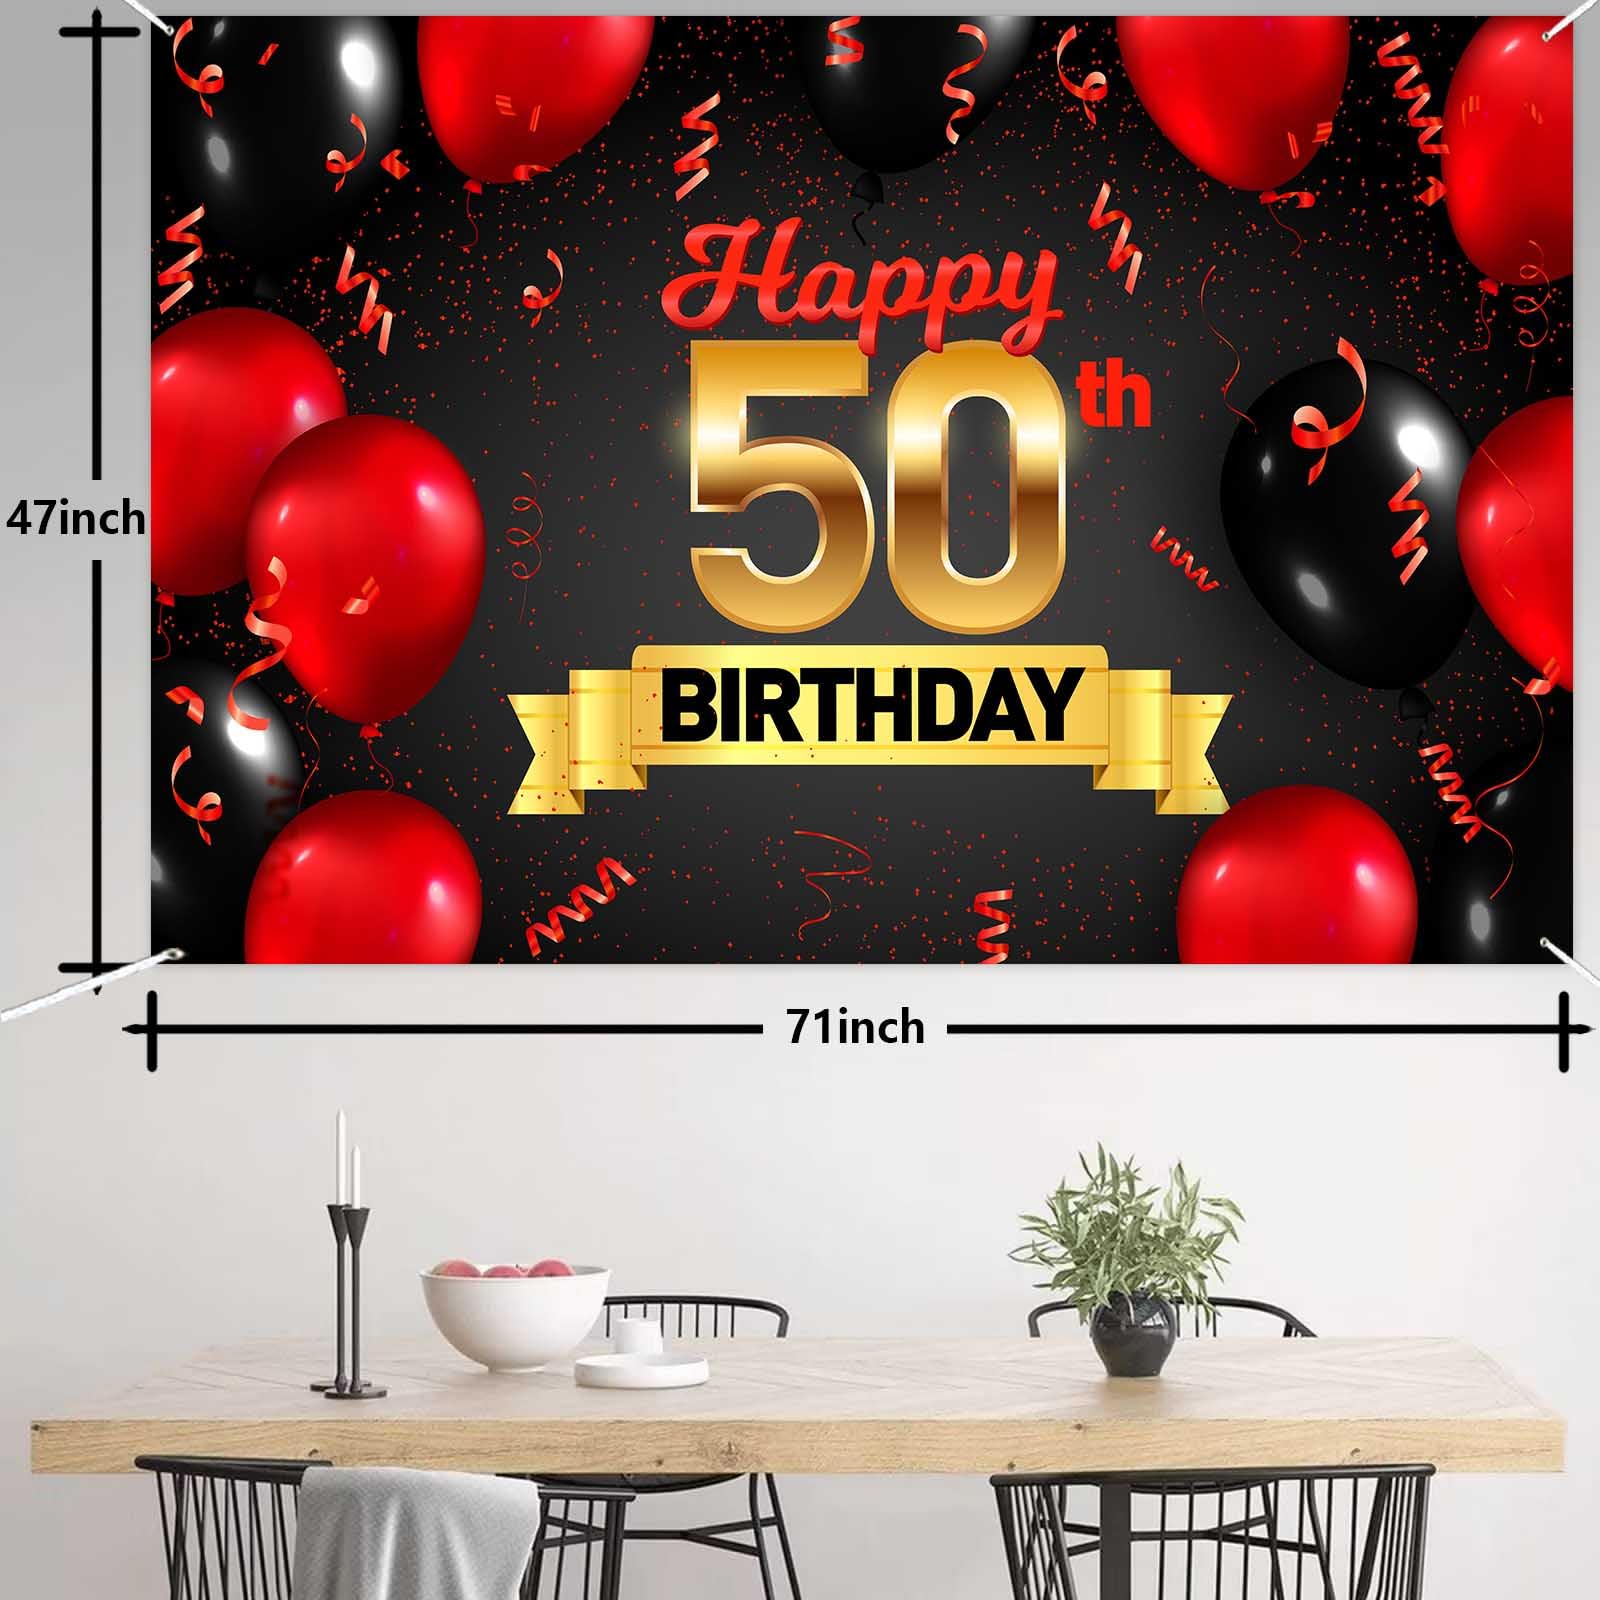 Happy 50th Birthday Red Black Decorations Banner Backdrop Background Balloons Cheers to 50 Years Old Bady Theme Decor for Girls Boys Happy 50 Birthday Party Photo Booth Props Favors Supplies